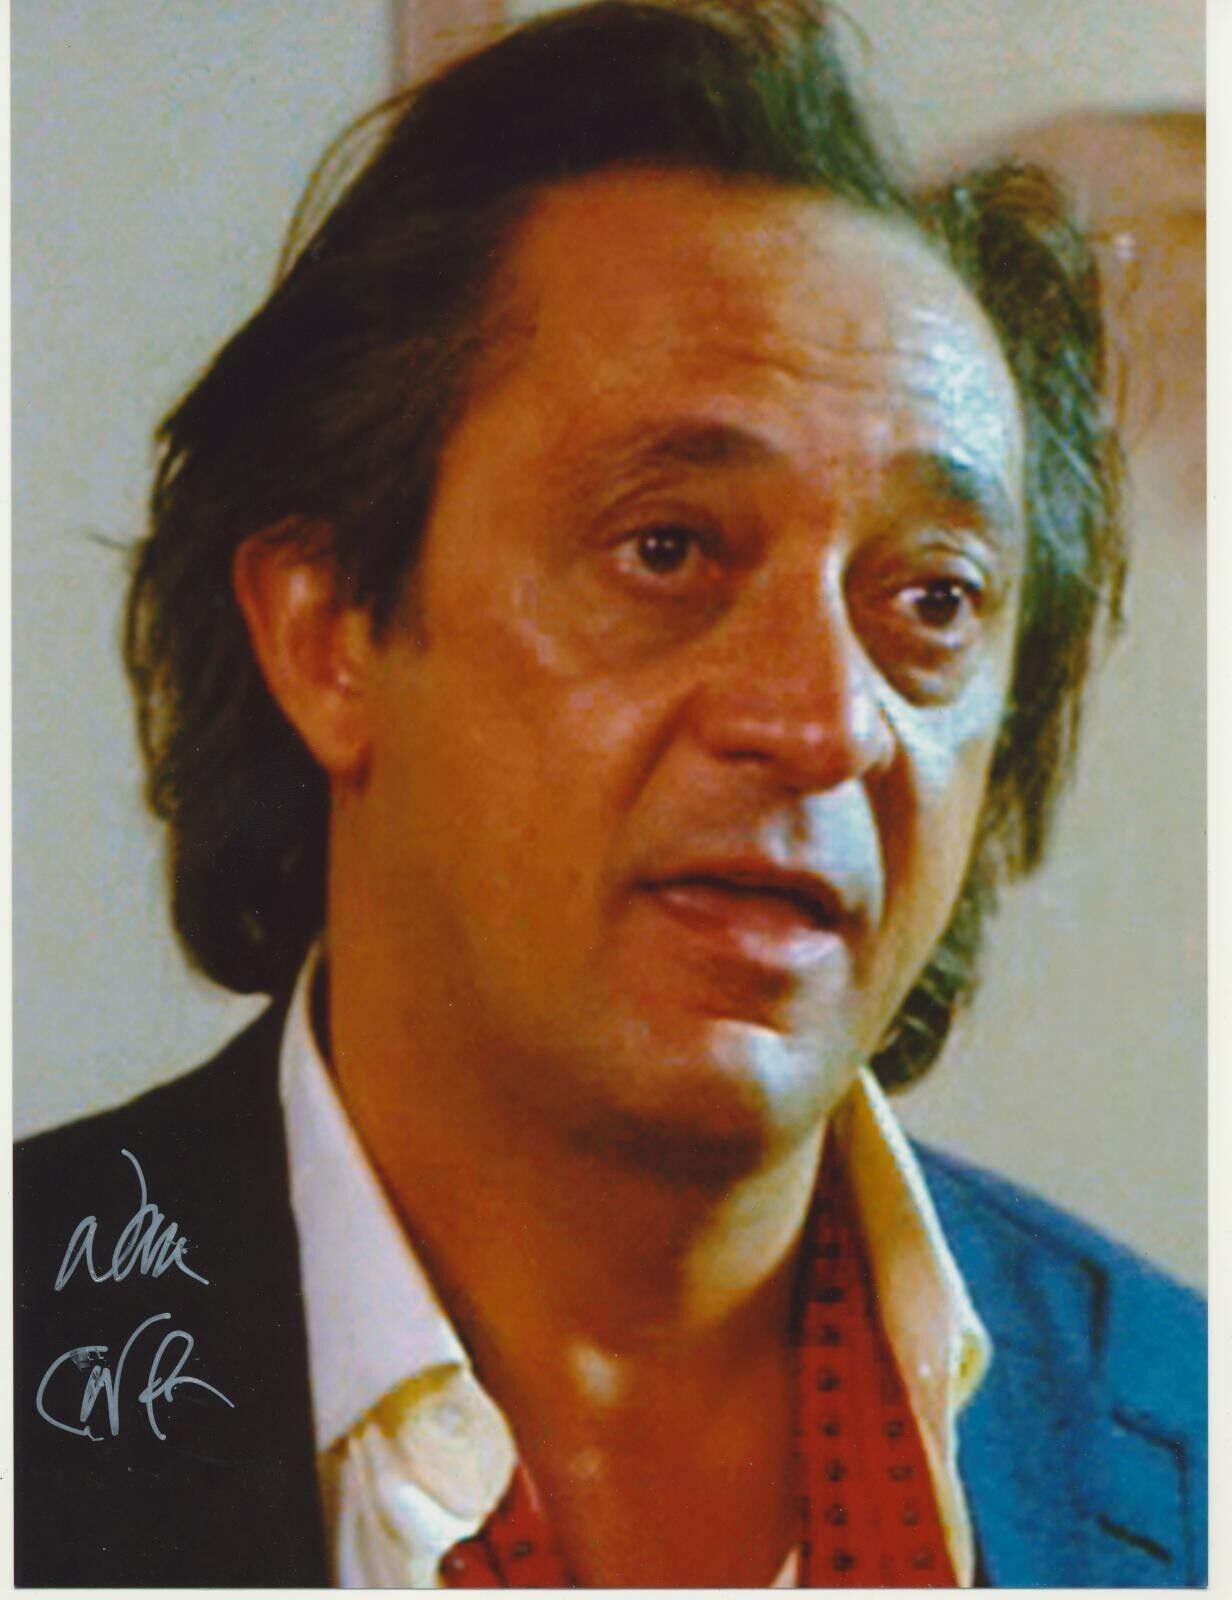 Don Calfa Autograph Signed 11x8 Photo Poster painting AFTAL [8324]